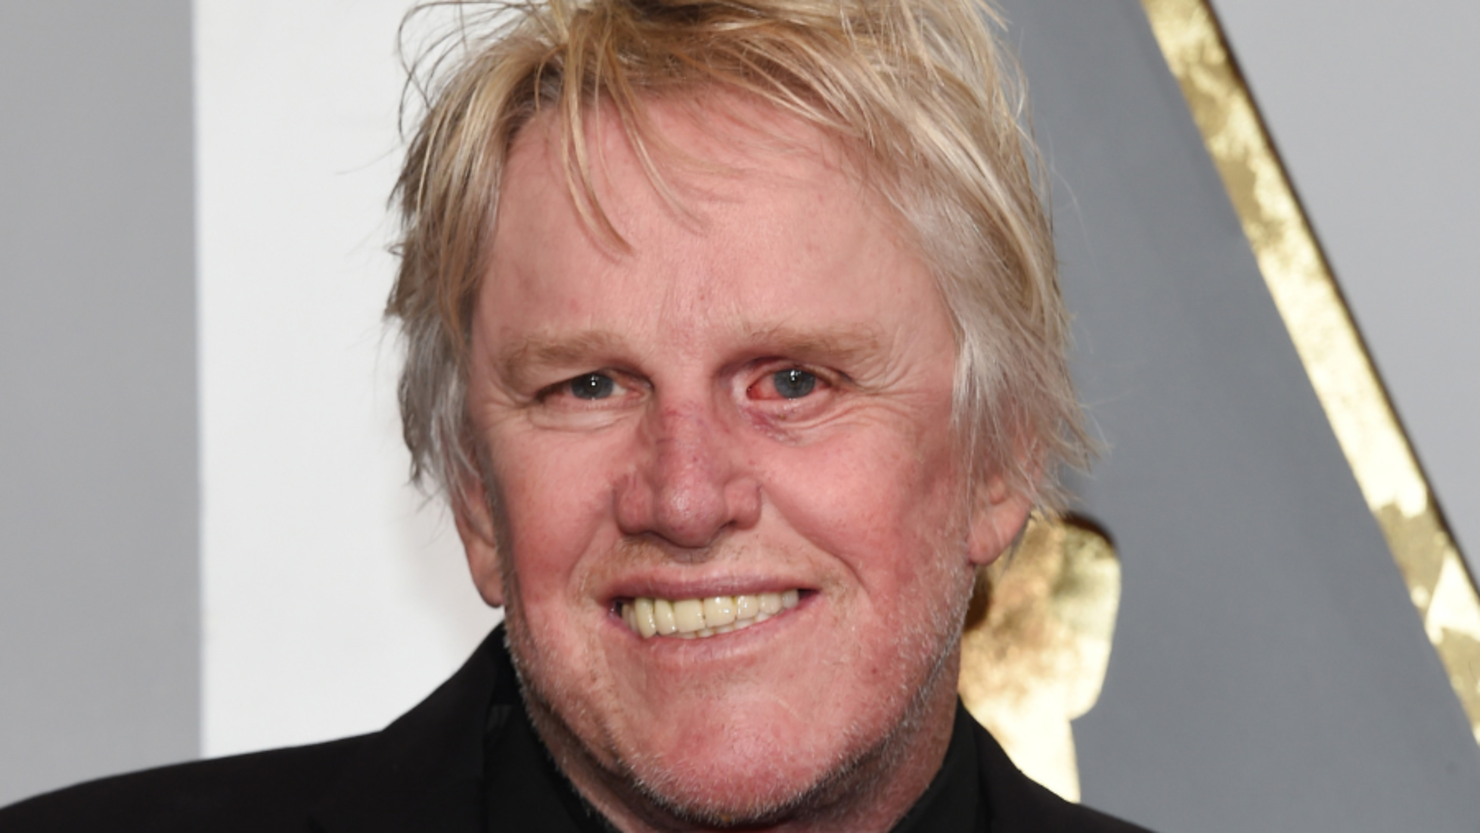 Gary Busey Net Worth 2022; How Much Wealthy He Is?